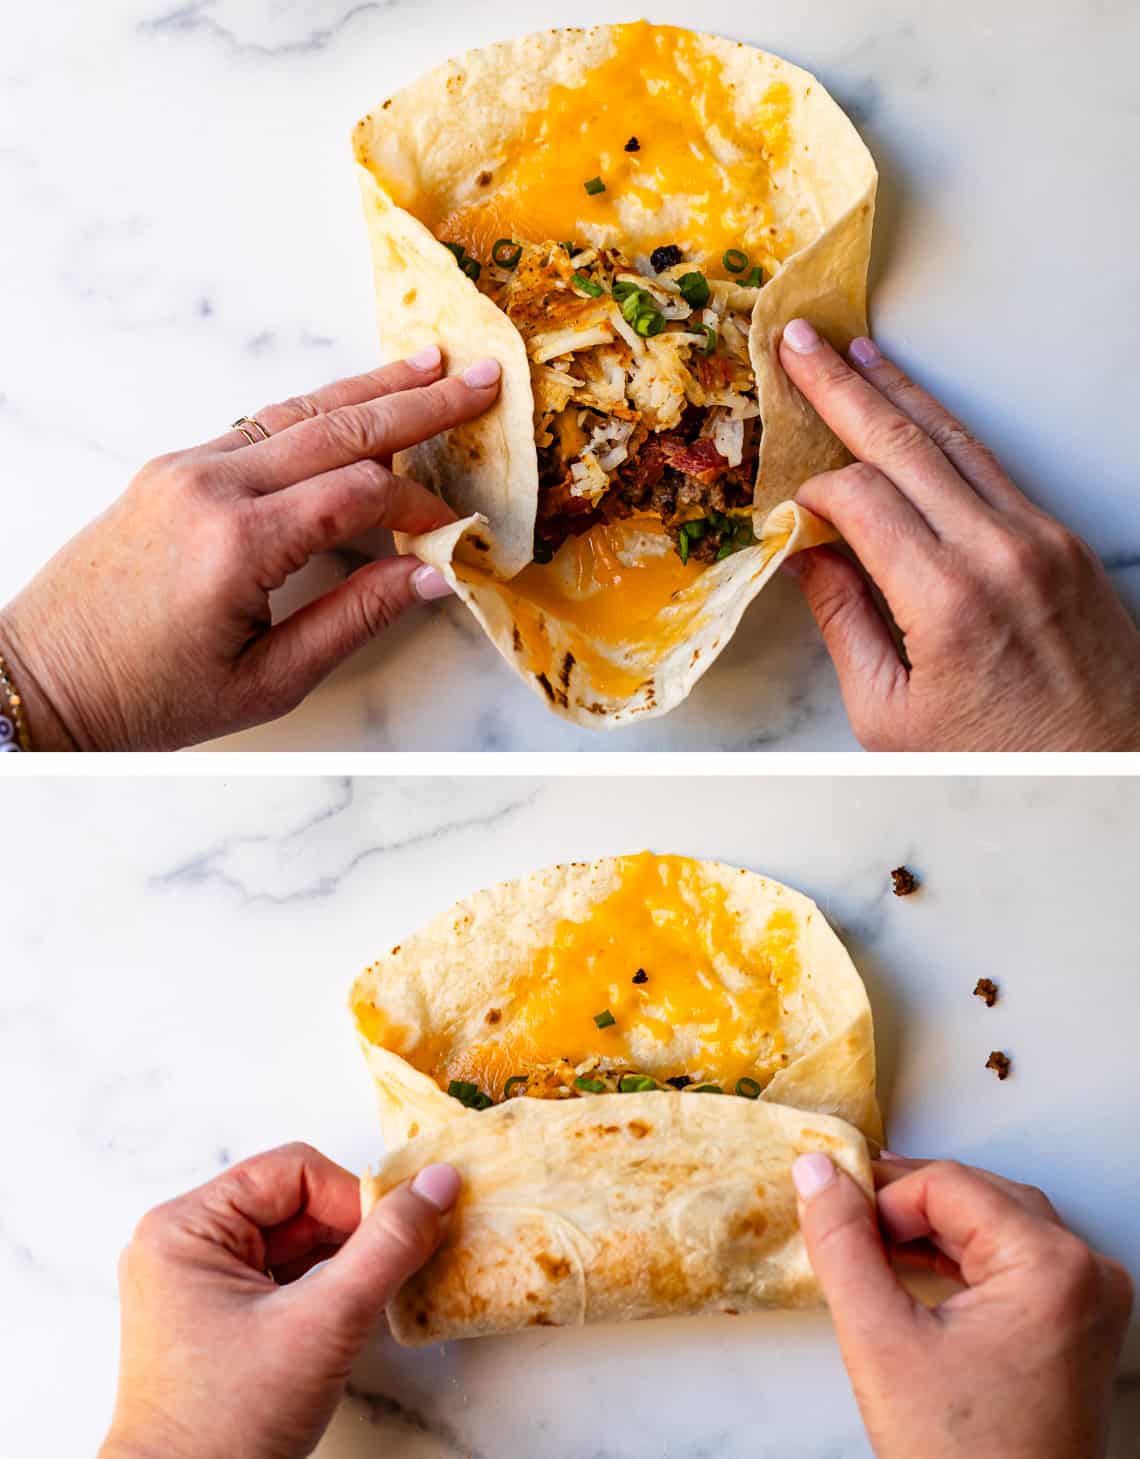 Folding a breakfast burrito starting with the sides and then folding from the bottom.